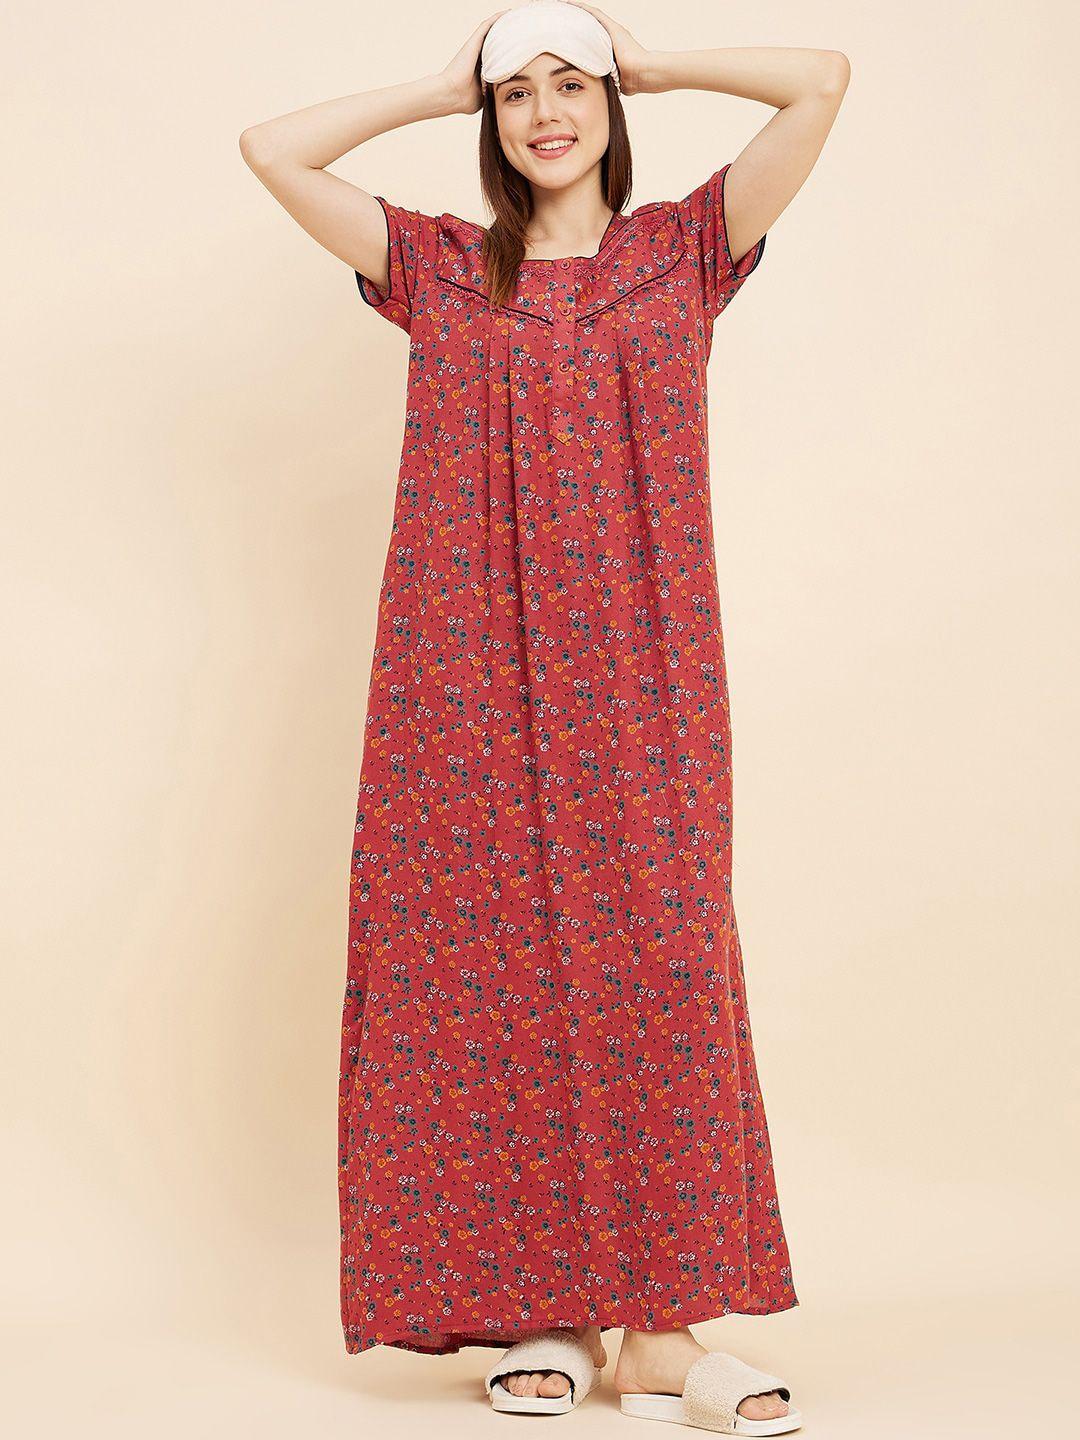 sweet-dreams-red-floral-printed-pure-cotton-maxi-nightdress